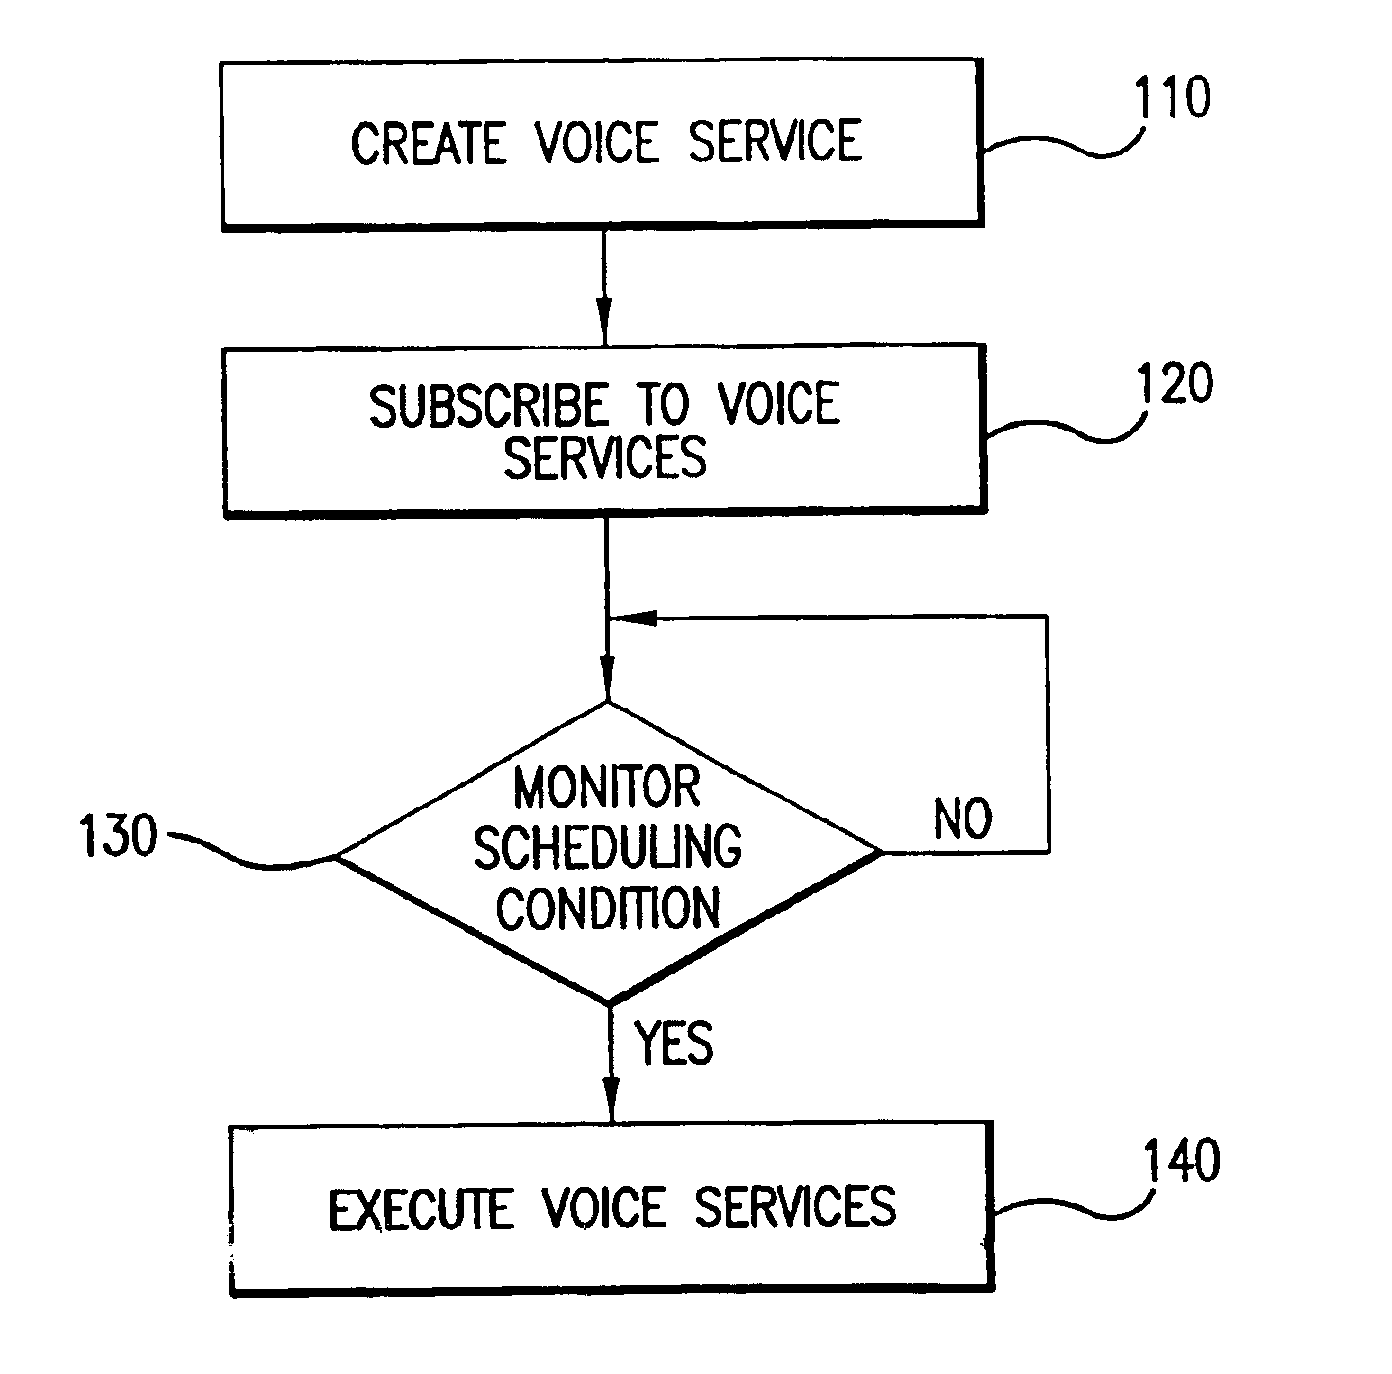 System and method for the creation and automatic deployment of personalized, dynamic and interactive voice services including module for generating and formatting voice services